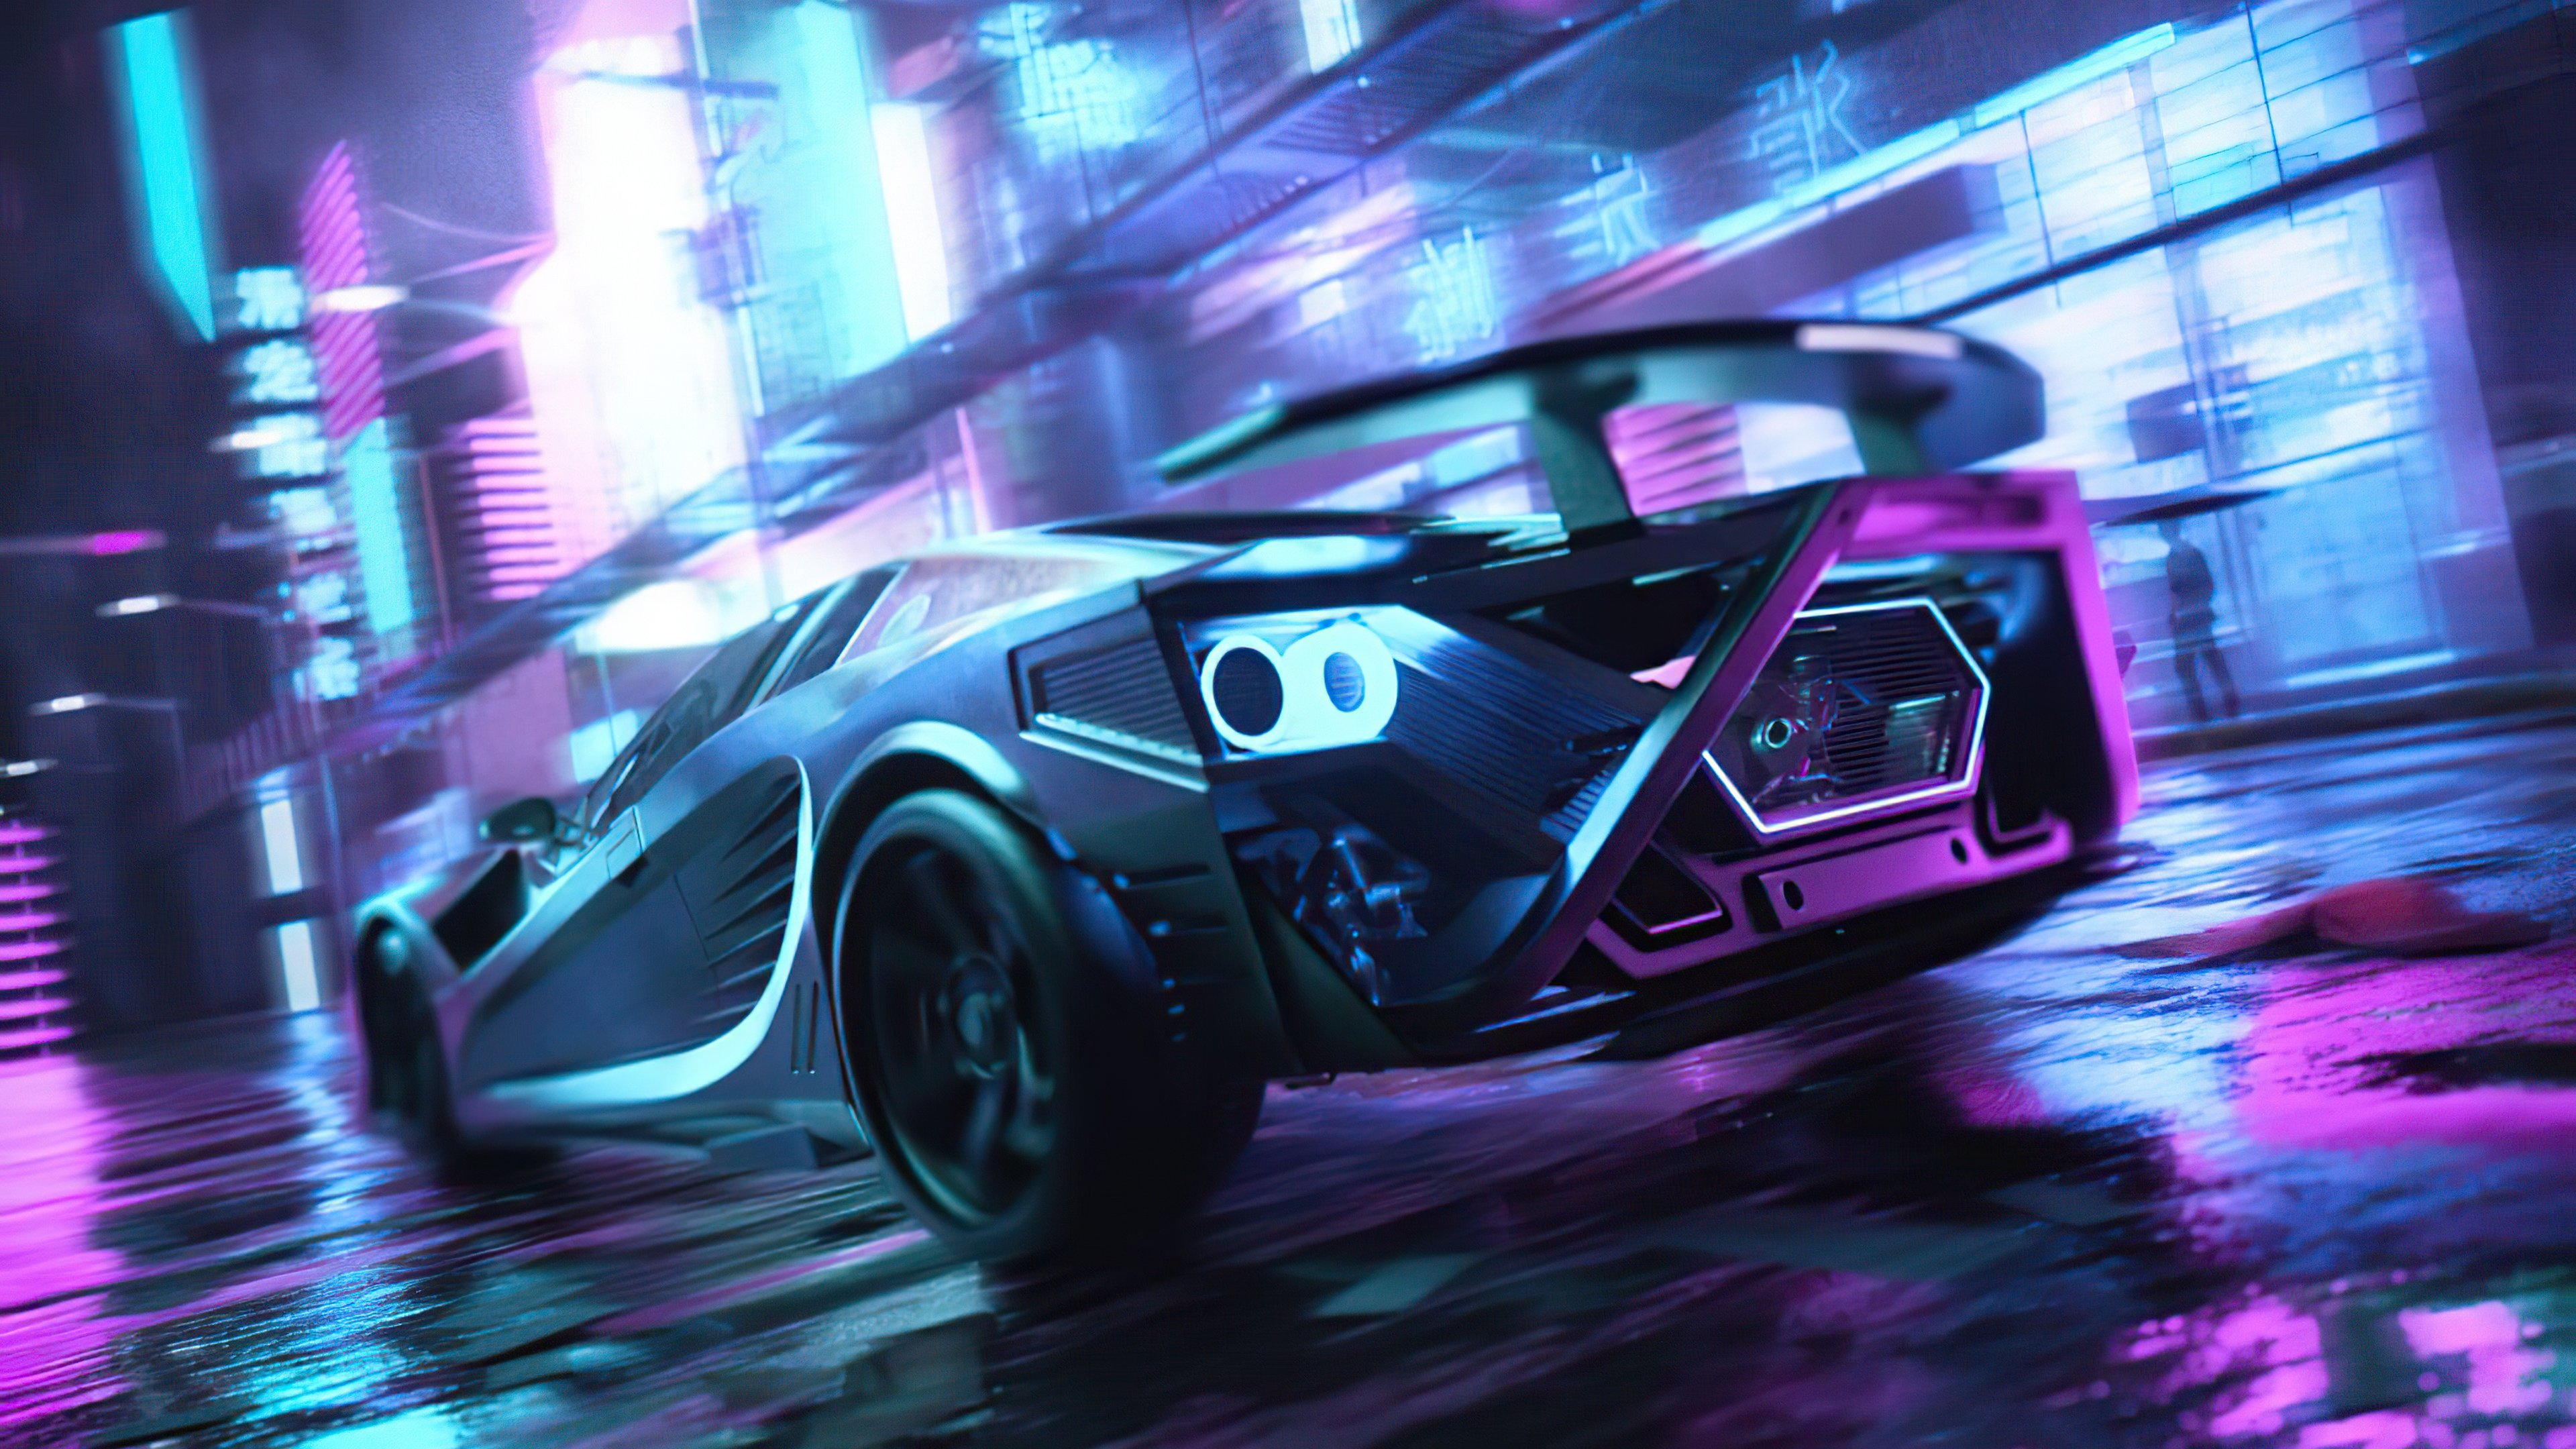 Scifi Neon Cars On Street, HD Cars, 4k Wallpaper, Image, Background, Photo and Picture